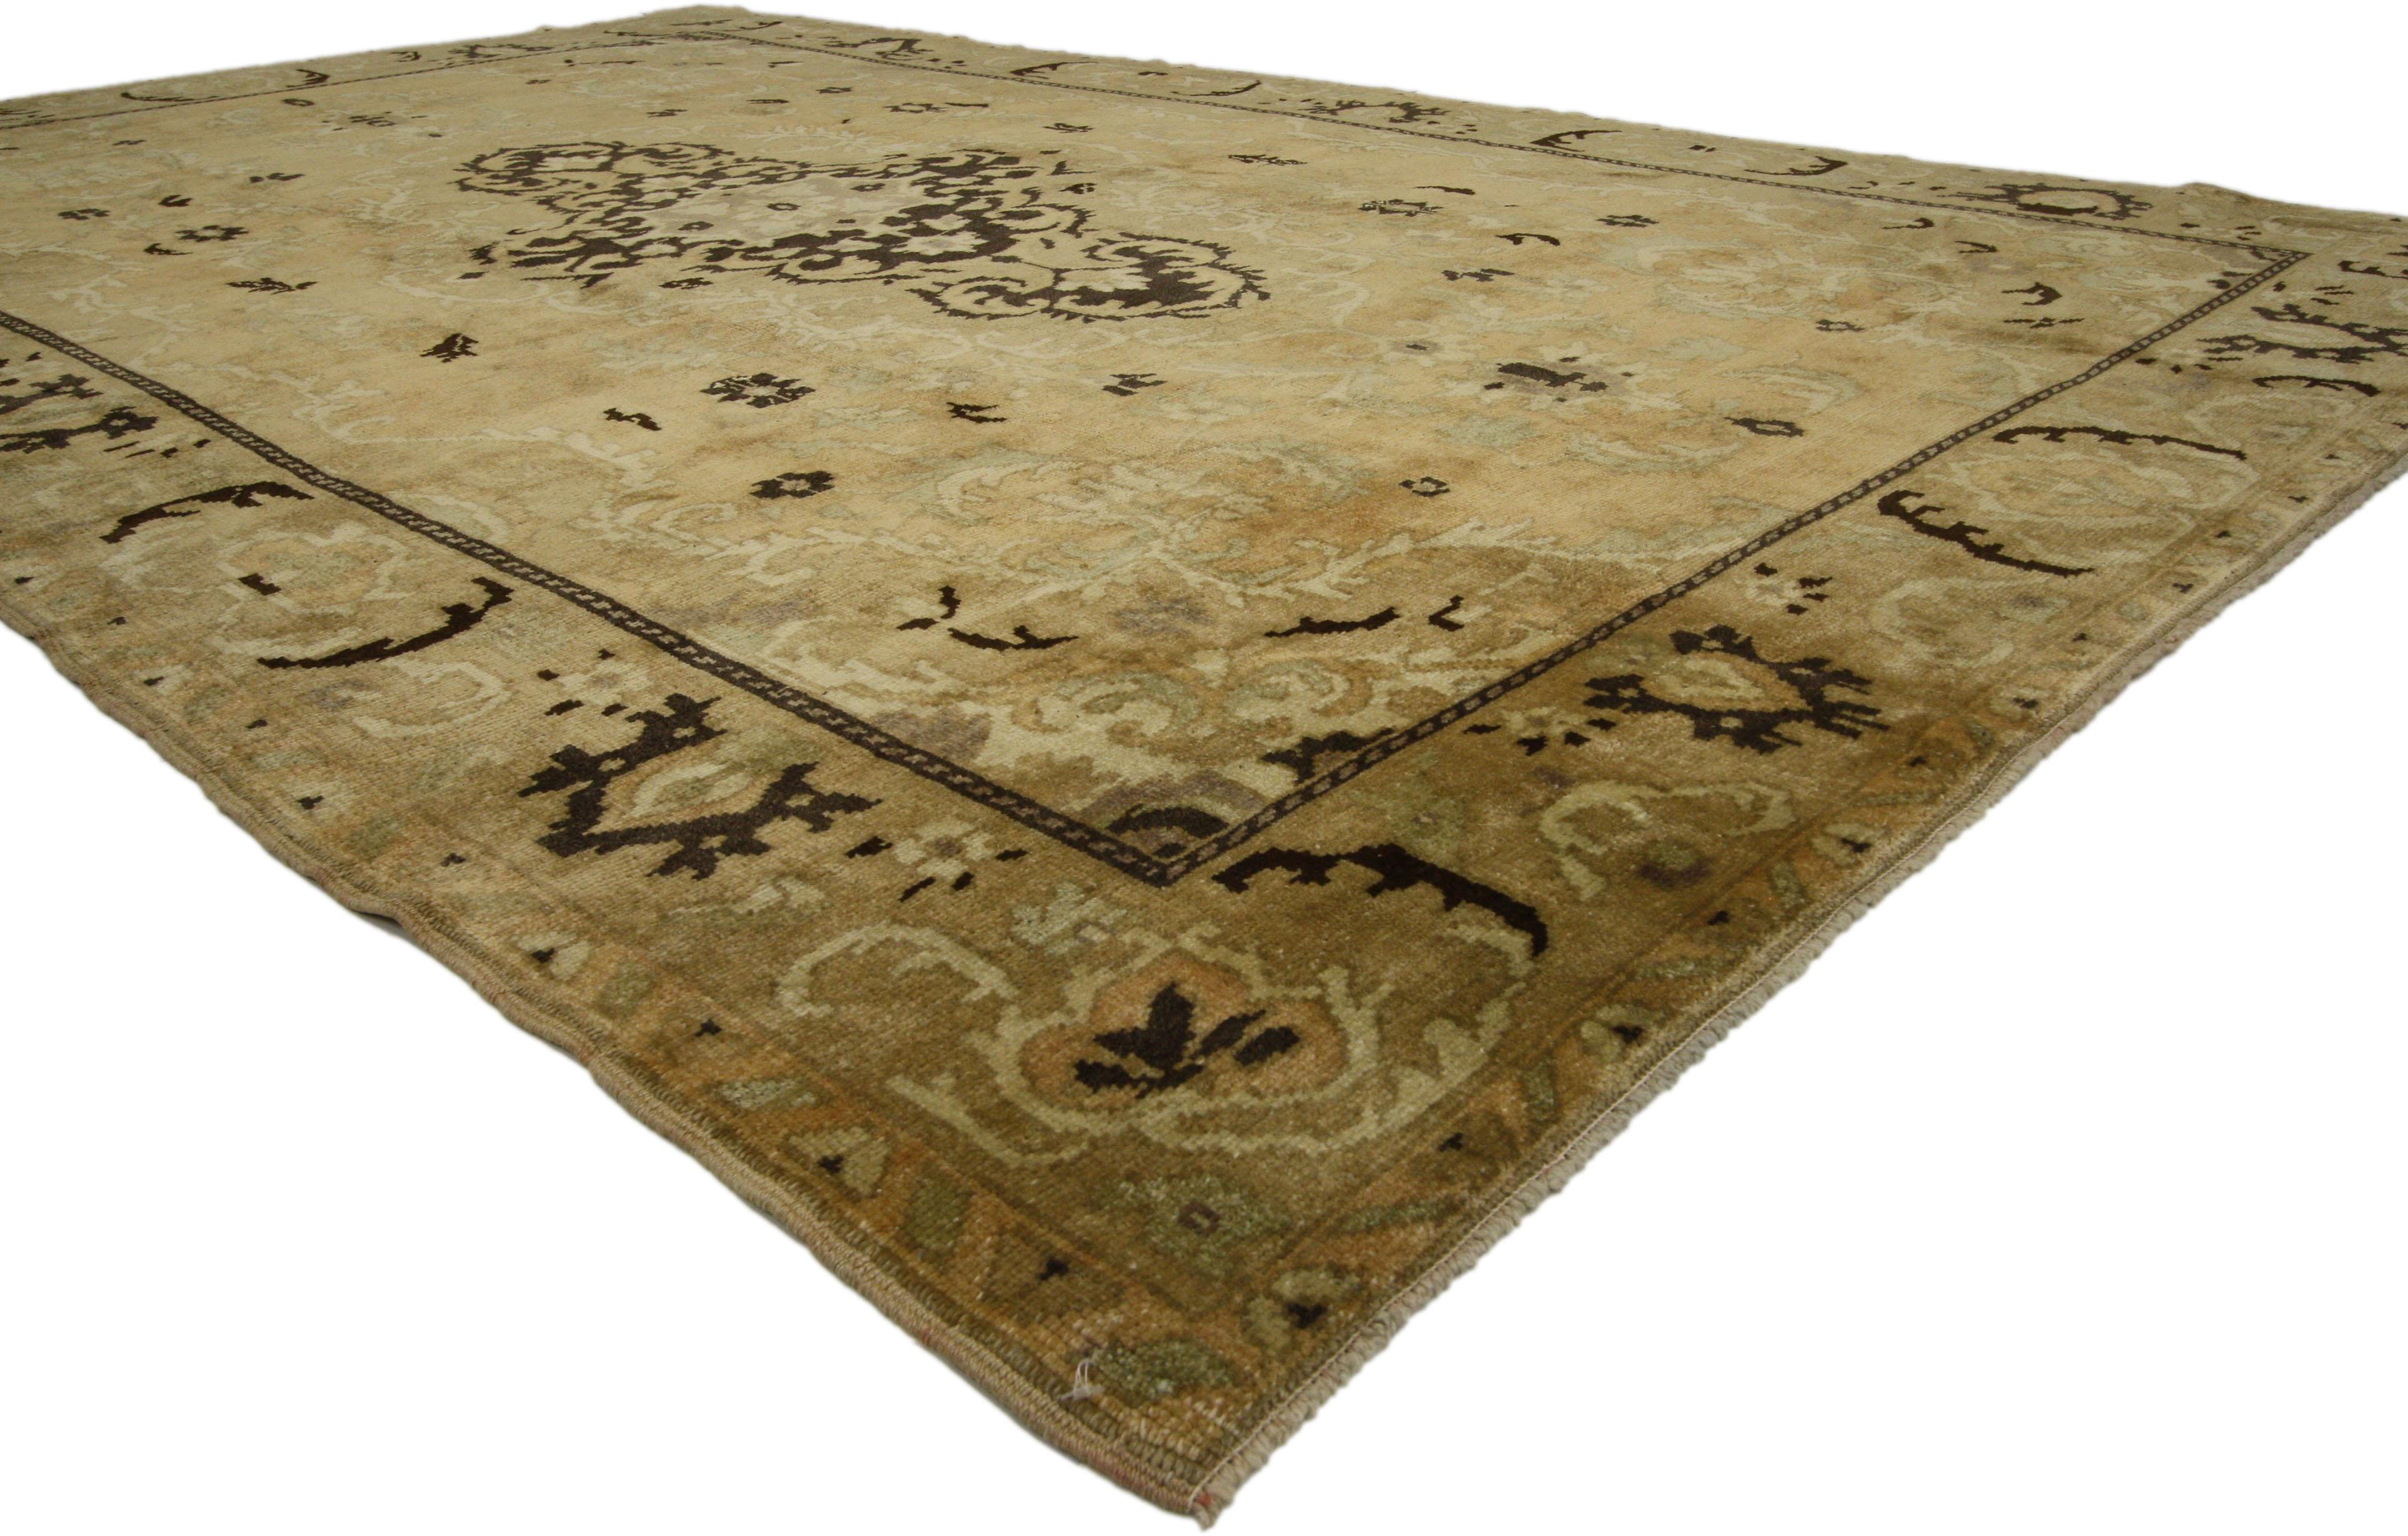 73761 vintage Turkish Oushak rug with warm Russian Dachas Luxe Home style. This hand knotted wool vintage Turkish Oushak rug features an ornate center medallion with curled leafy tendril extensions outlined in a frondescence of acanthus leaves. The